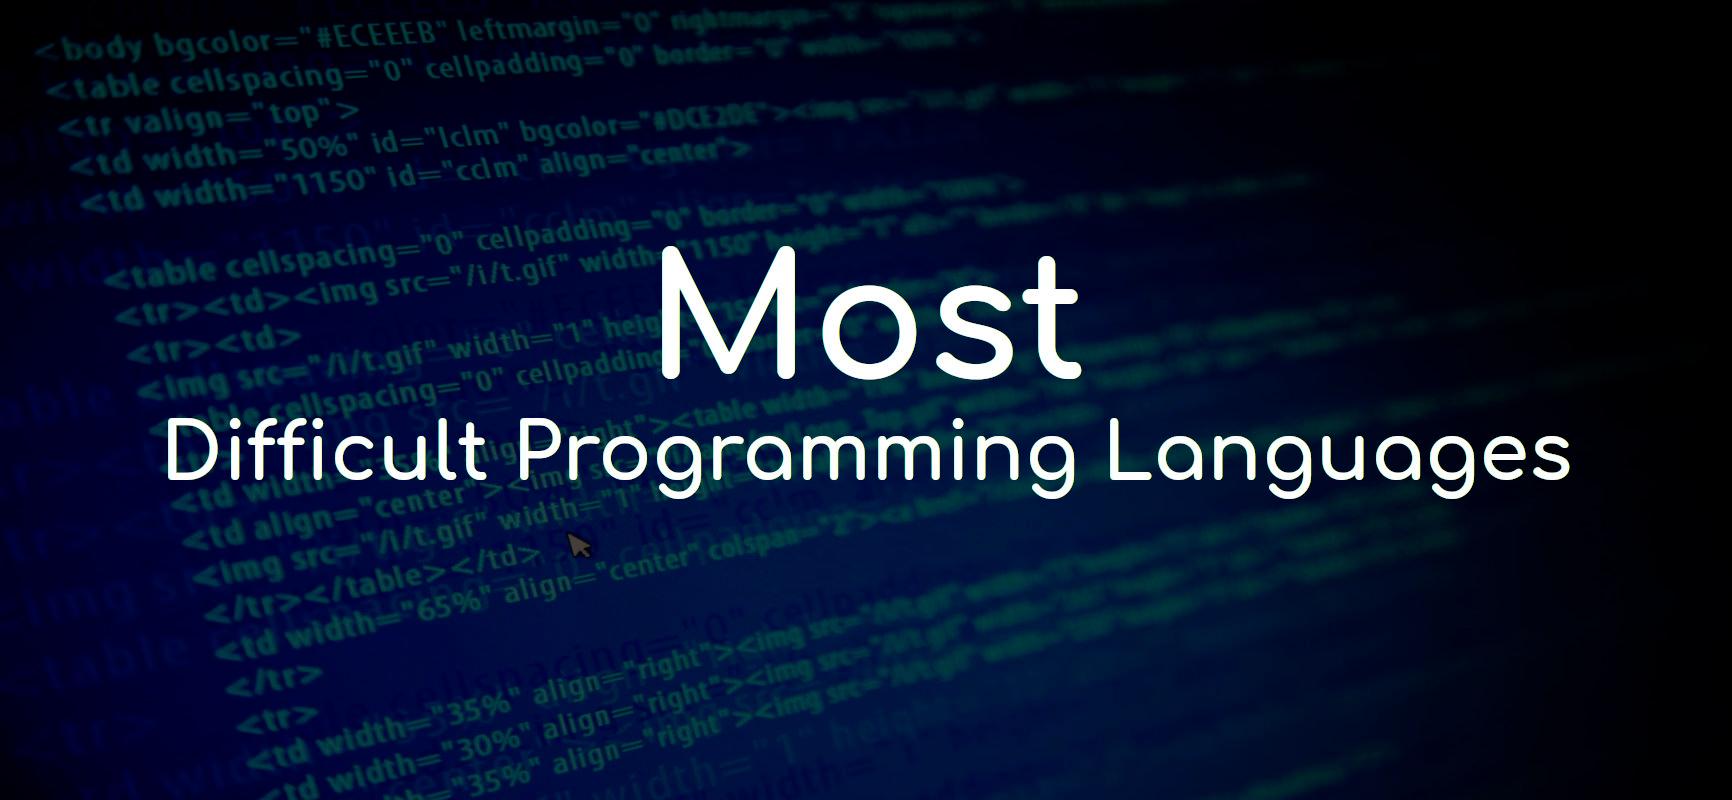 Programming languages that hard to learn